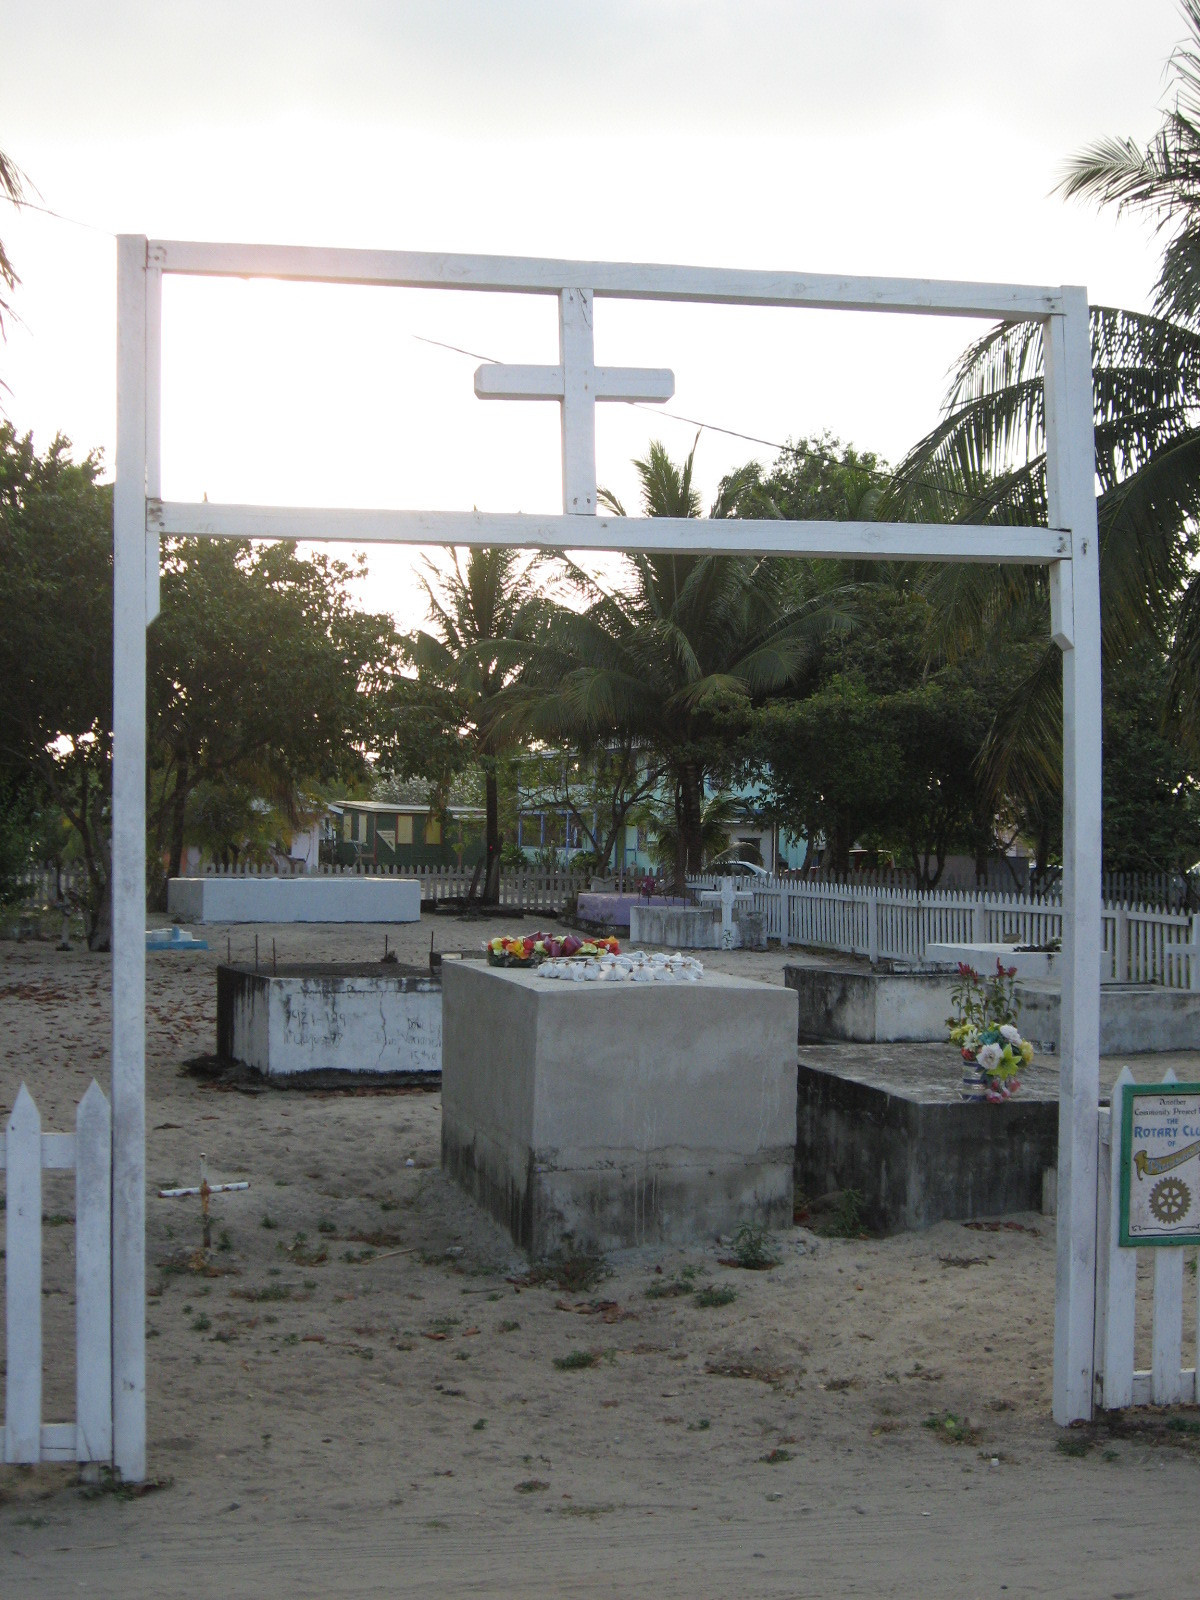 Cementery in Placencia, Belize